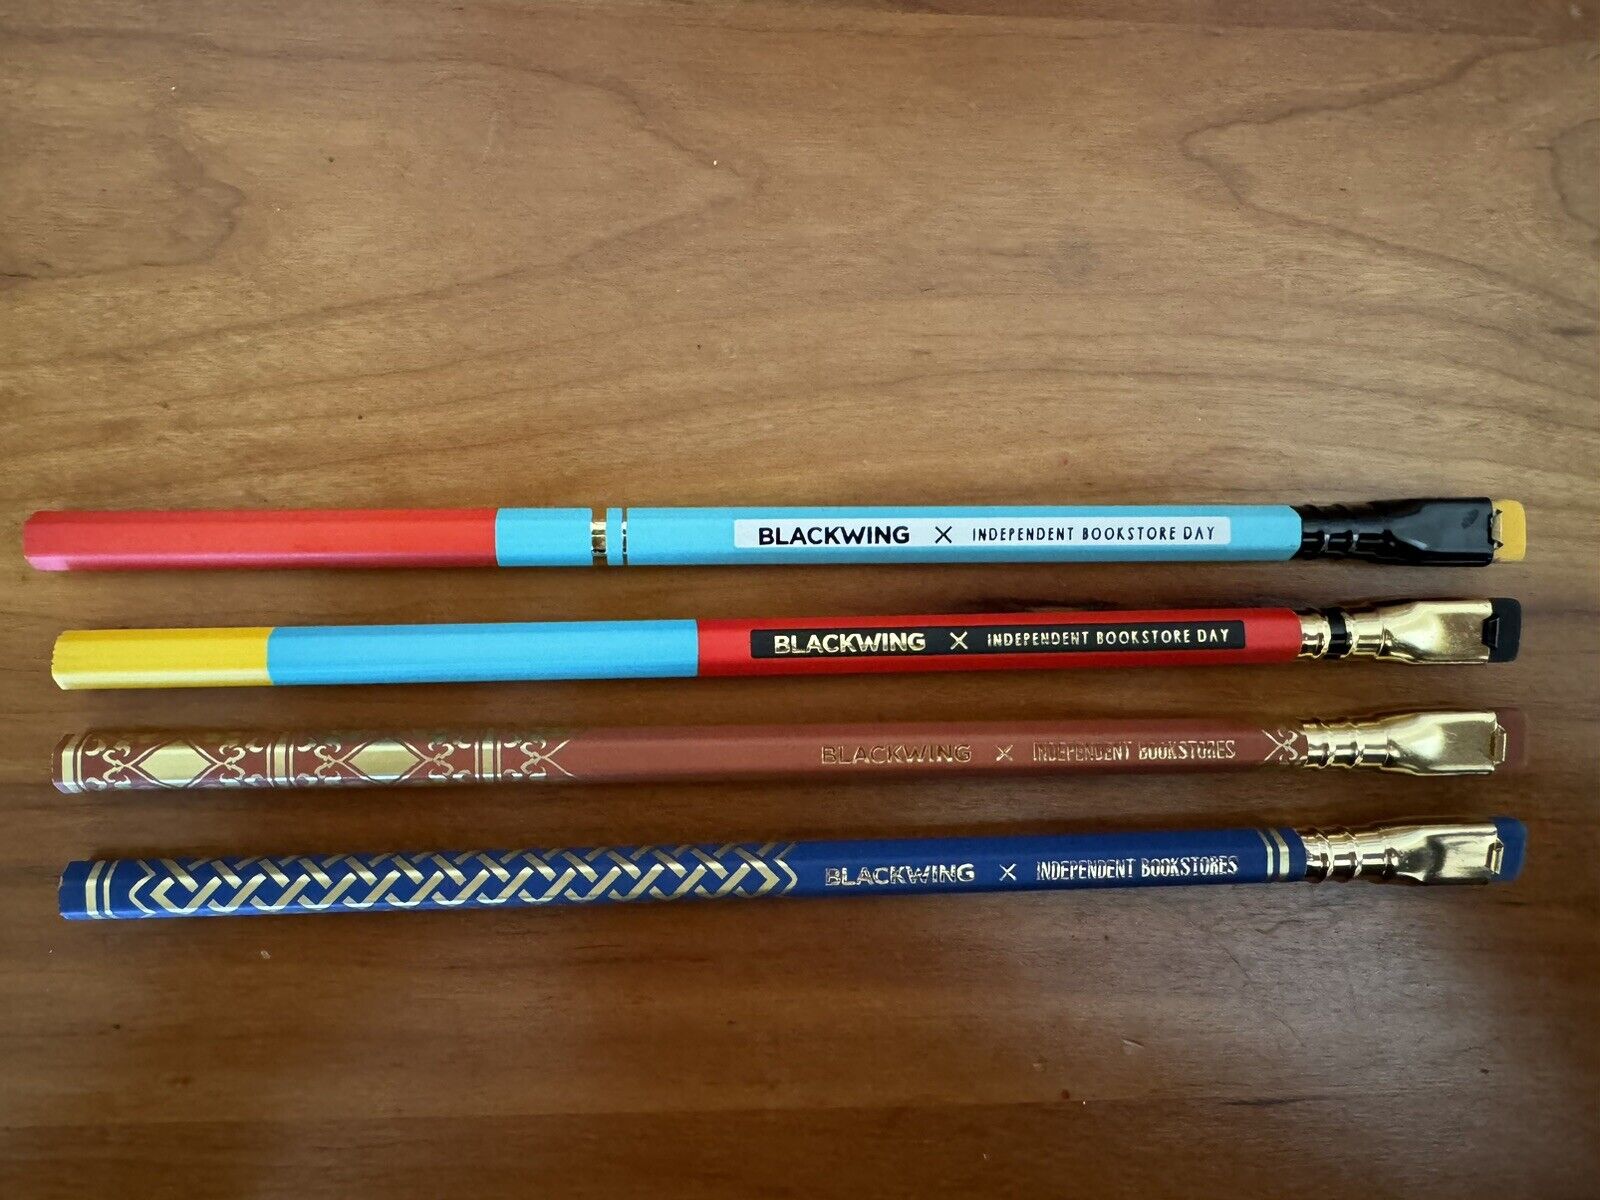 Blackwing Independent Bookstore Day Sampler: 4 Pencils (no boxes)